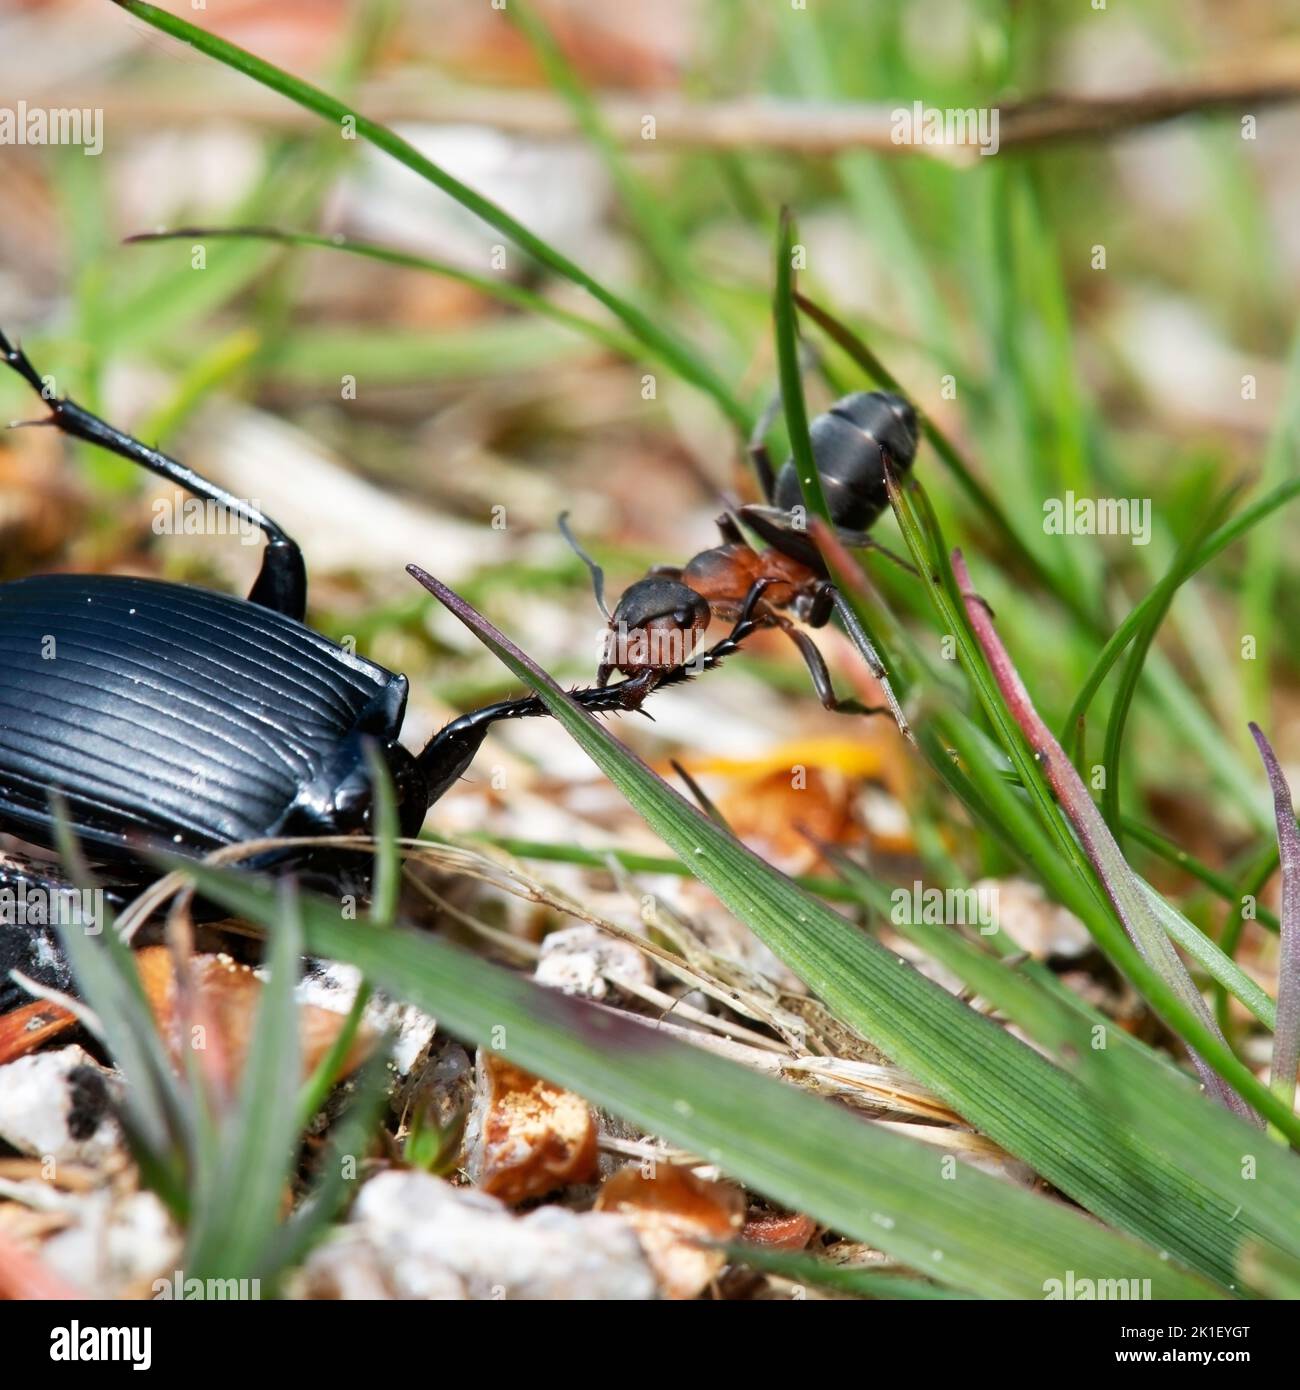 Ant dragging a beetle body Stock Photo